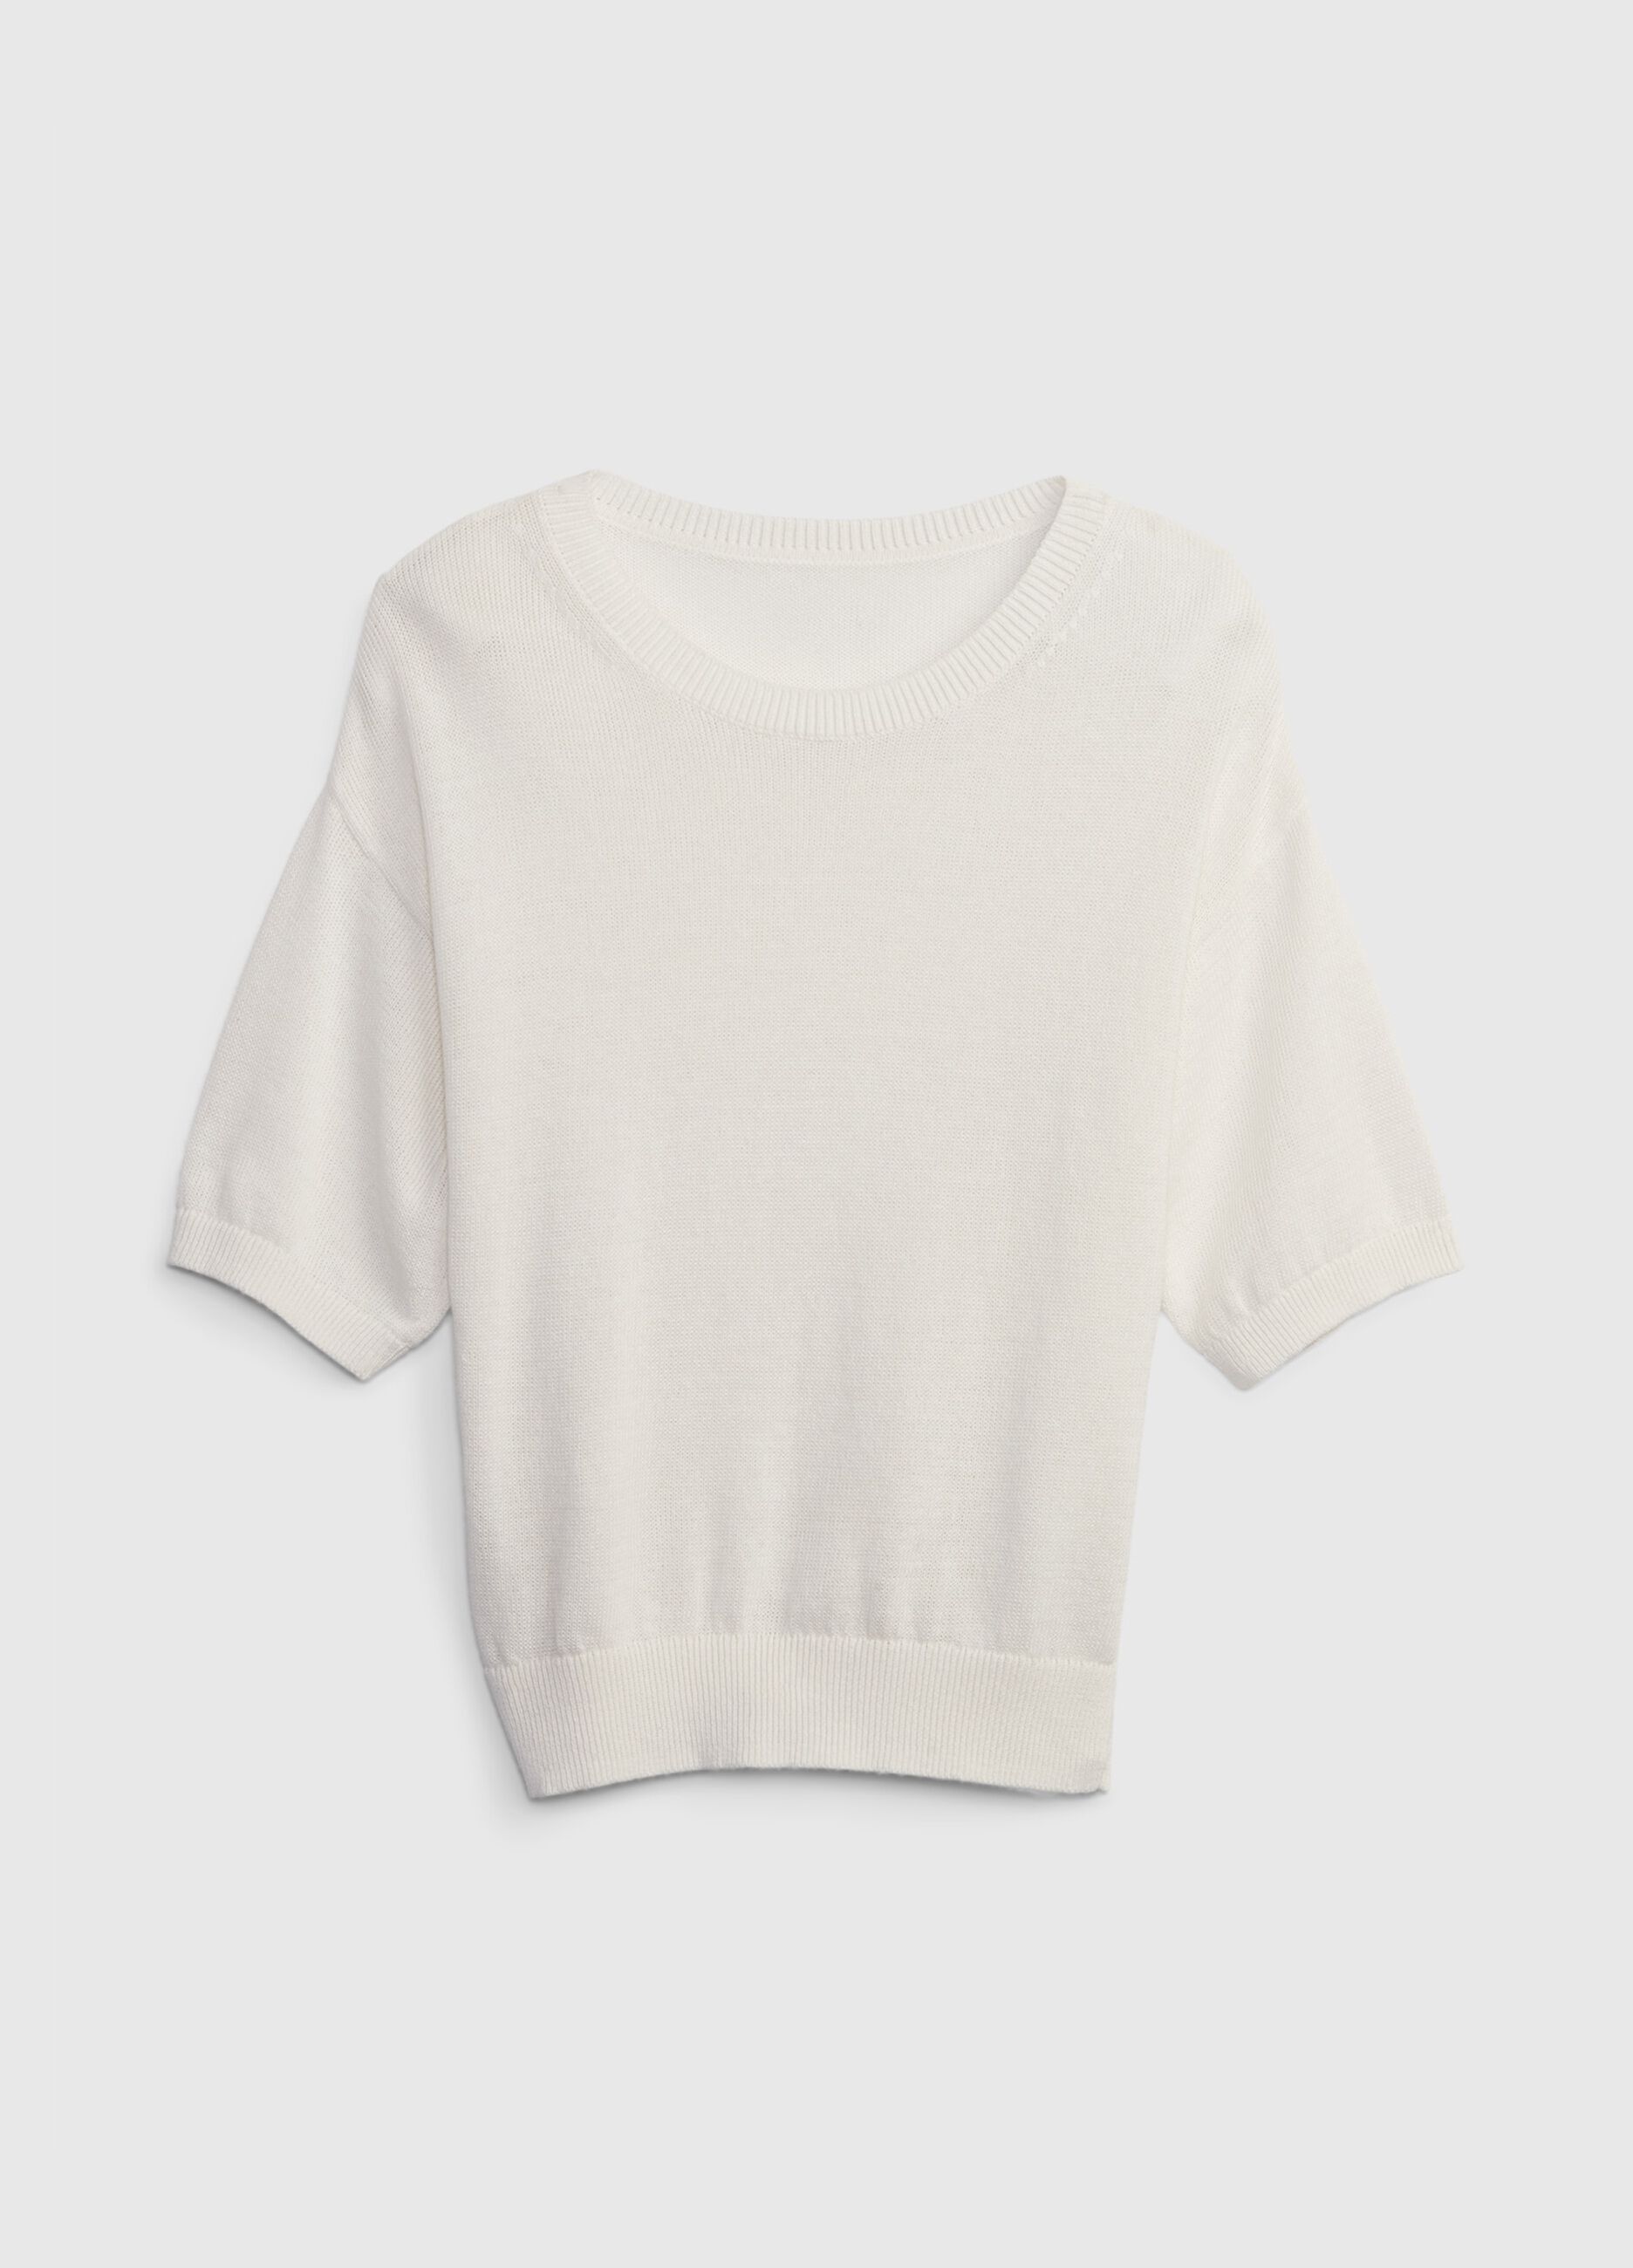 Elbow-length pullover in linen and cotton_5